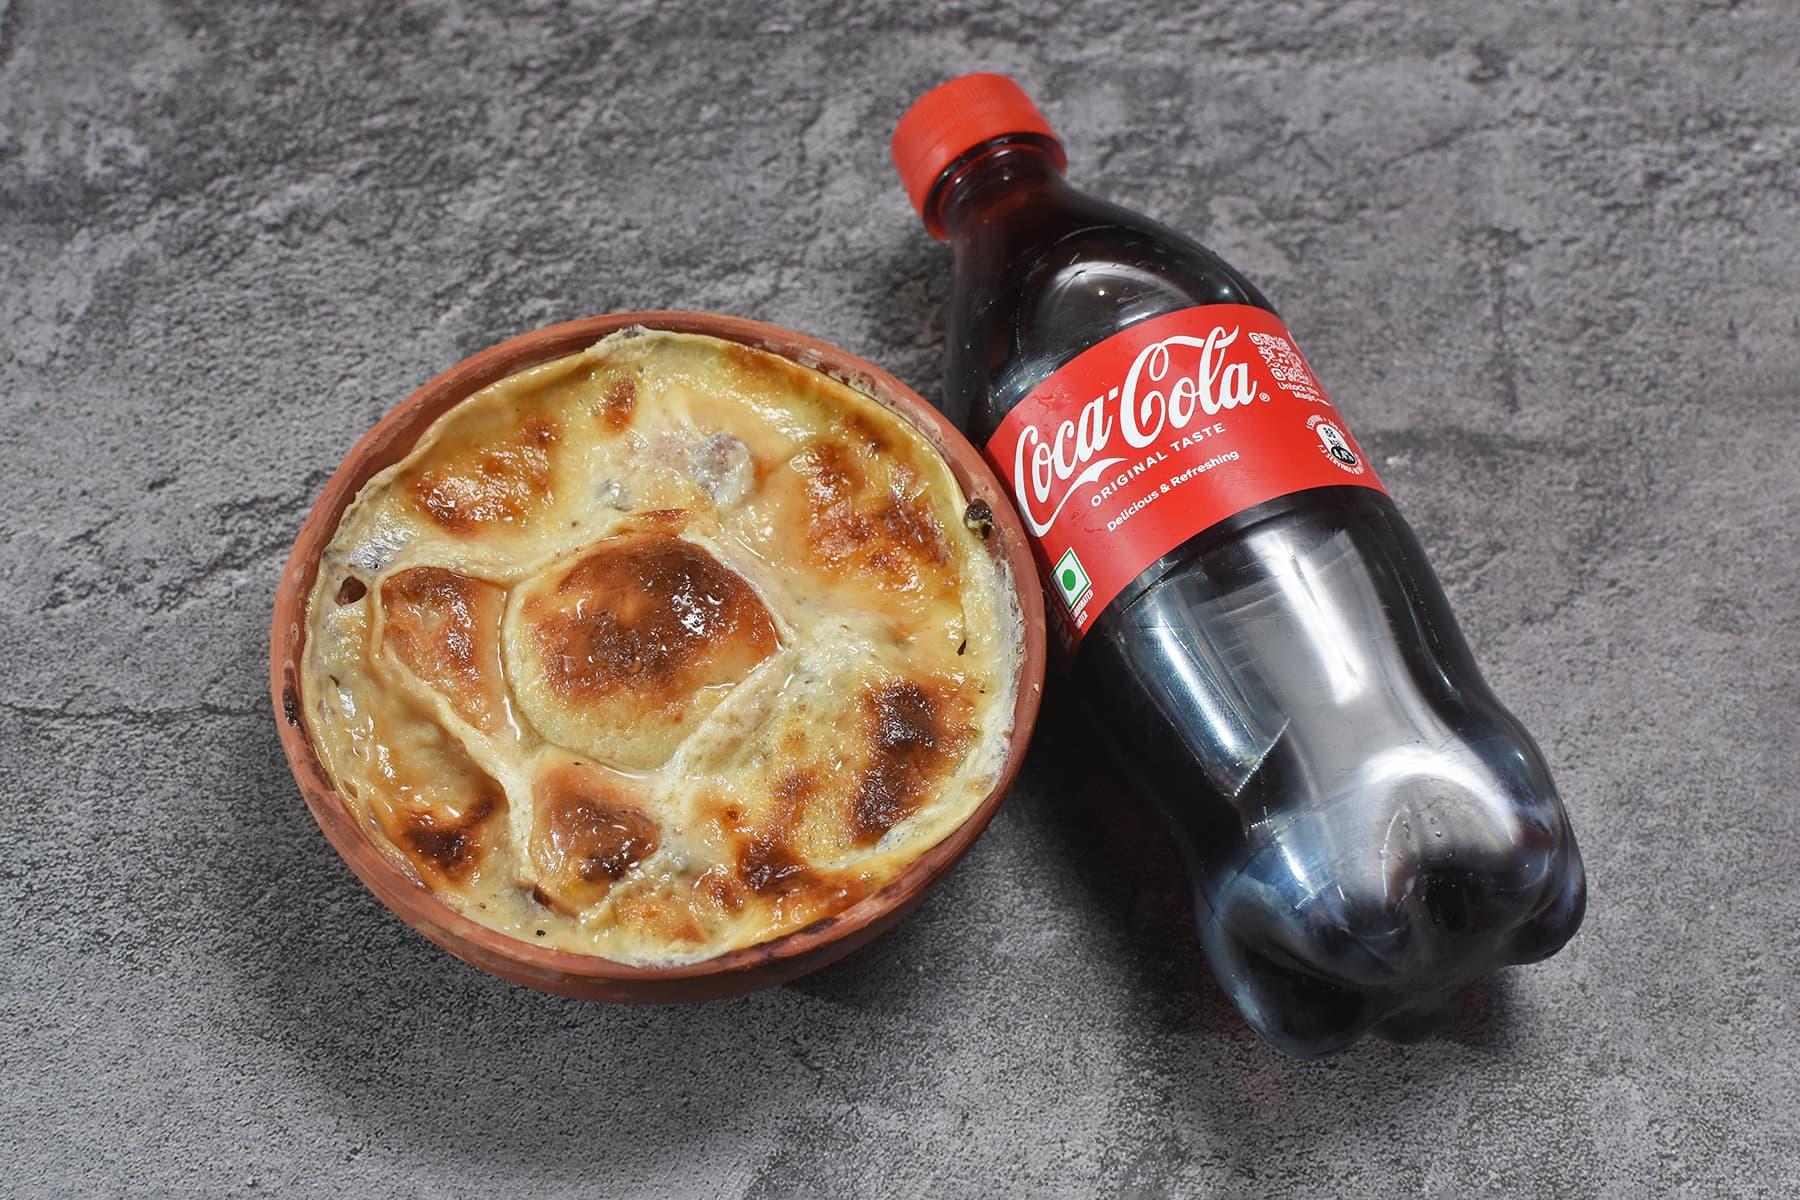 Baked Rasgulla [5 Pieces] With Coke Soft Beverage [250 Ml]